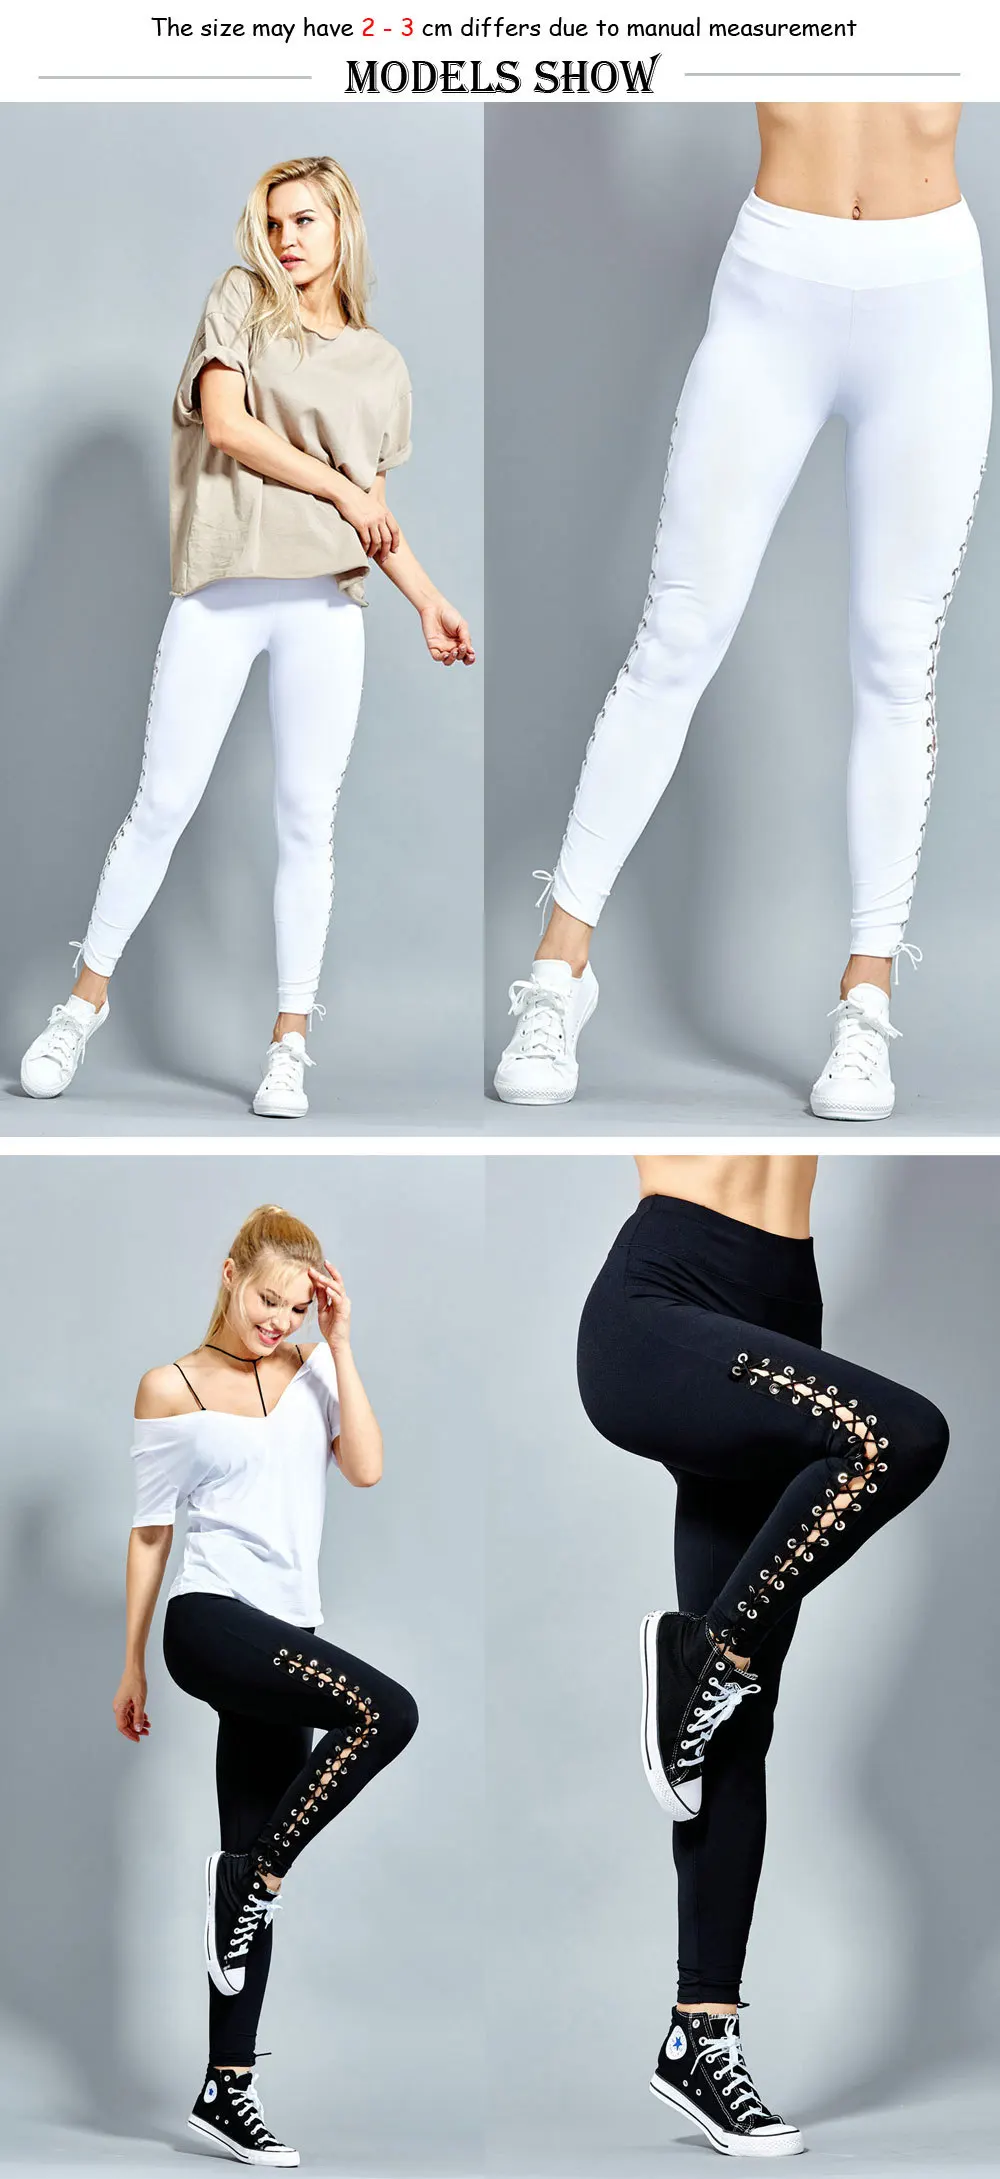 2018 New Arrival Woman jeans Solid Pencil women Pants Girls Sexy Black White Color Slim Trousers Casual Club Wear Female Pant 9